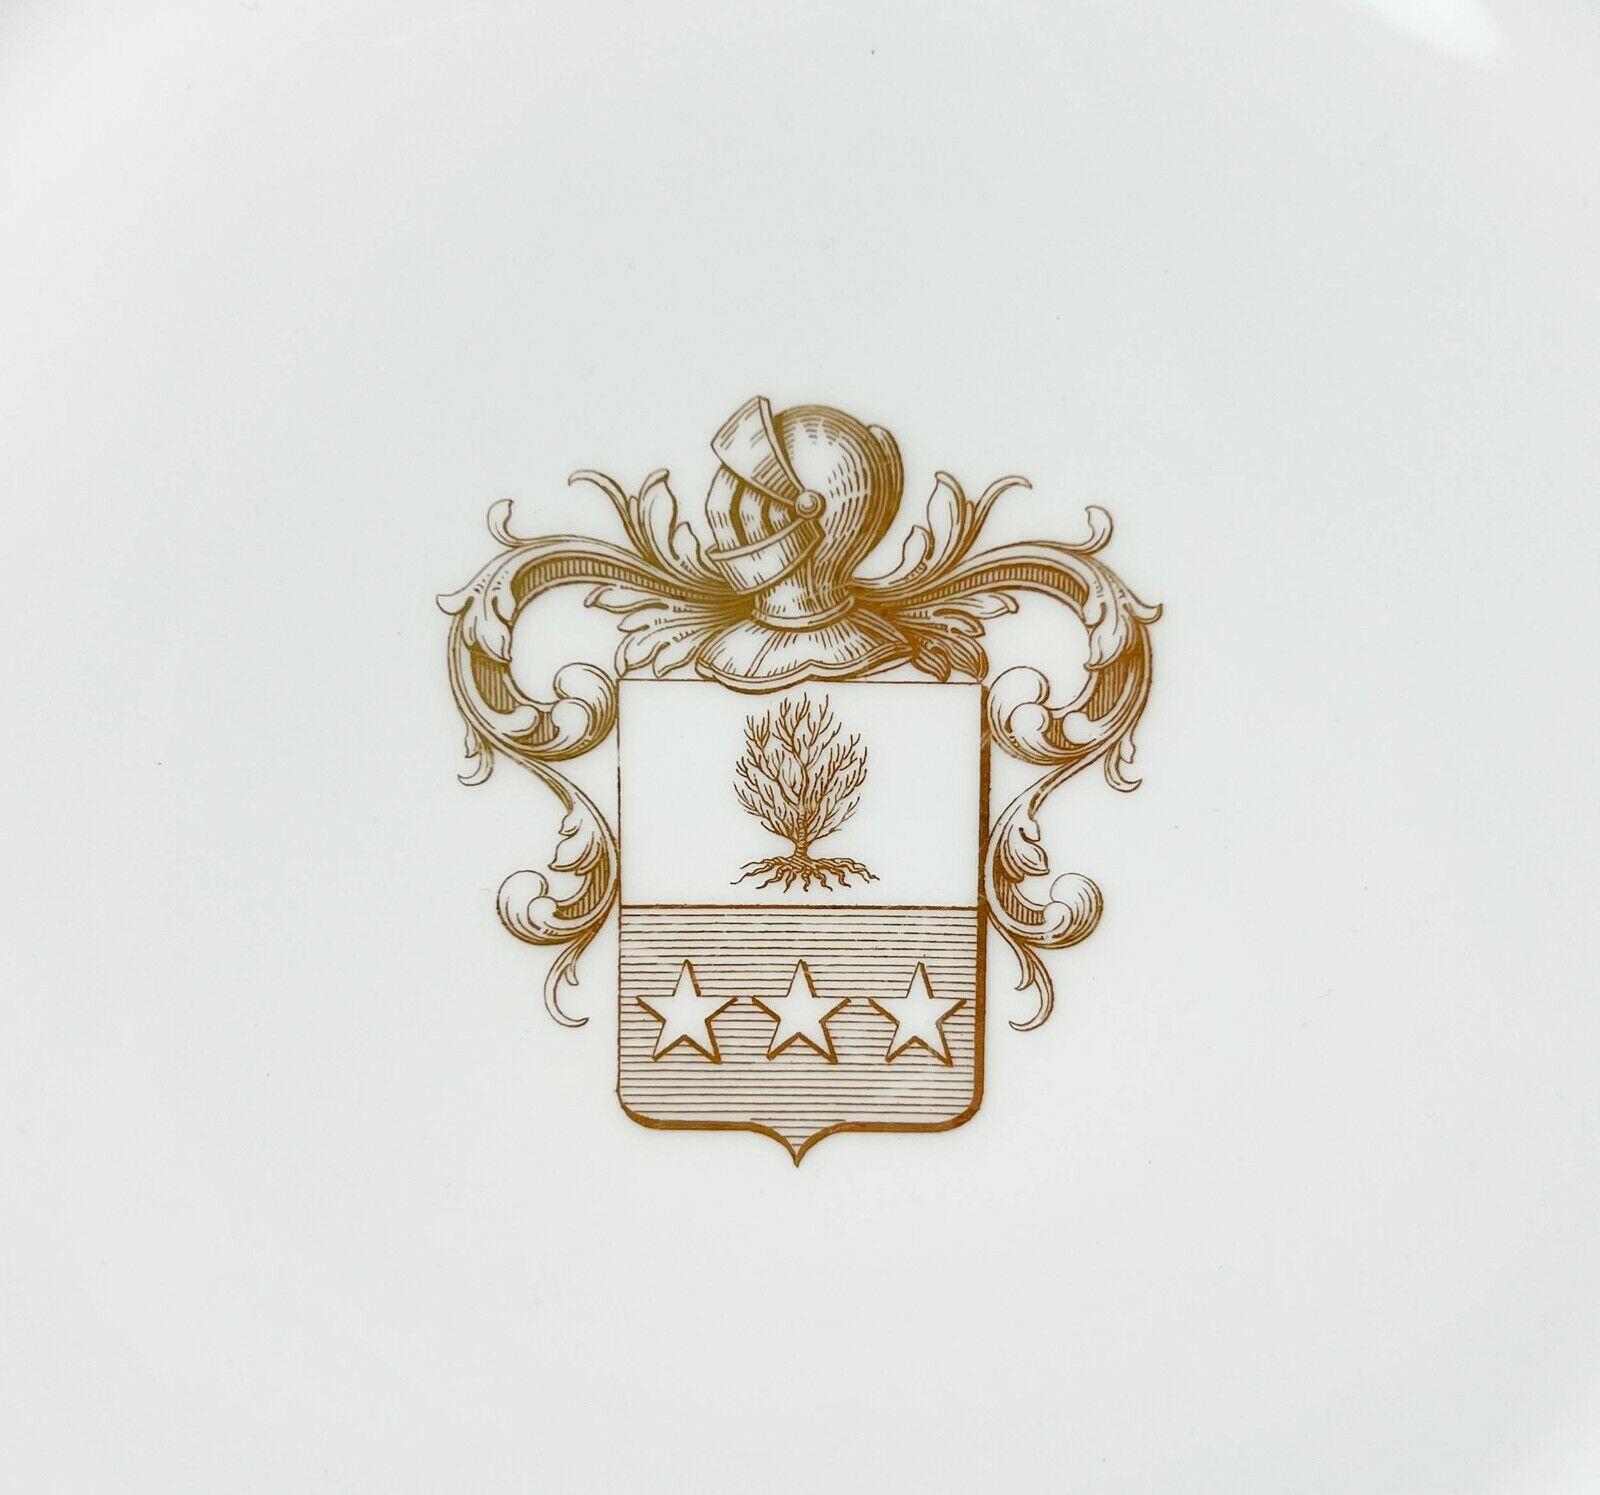 Pair Manufacture de Sevres Gilt Armorial Porcelain cabinet plates, 1859 & 1860

A white ground with gilt coat of arms to the center featuring a helmet with foliate scrolls, a tree within a shield with three stars. Gilt to the rim and foot. Sevres